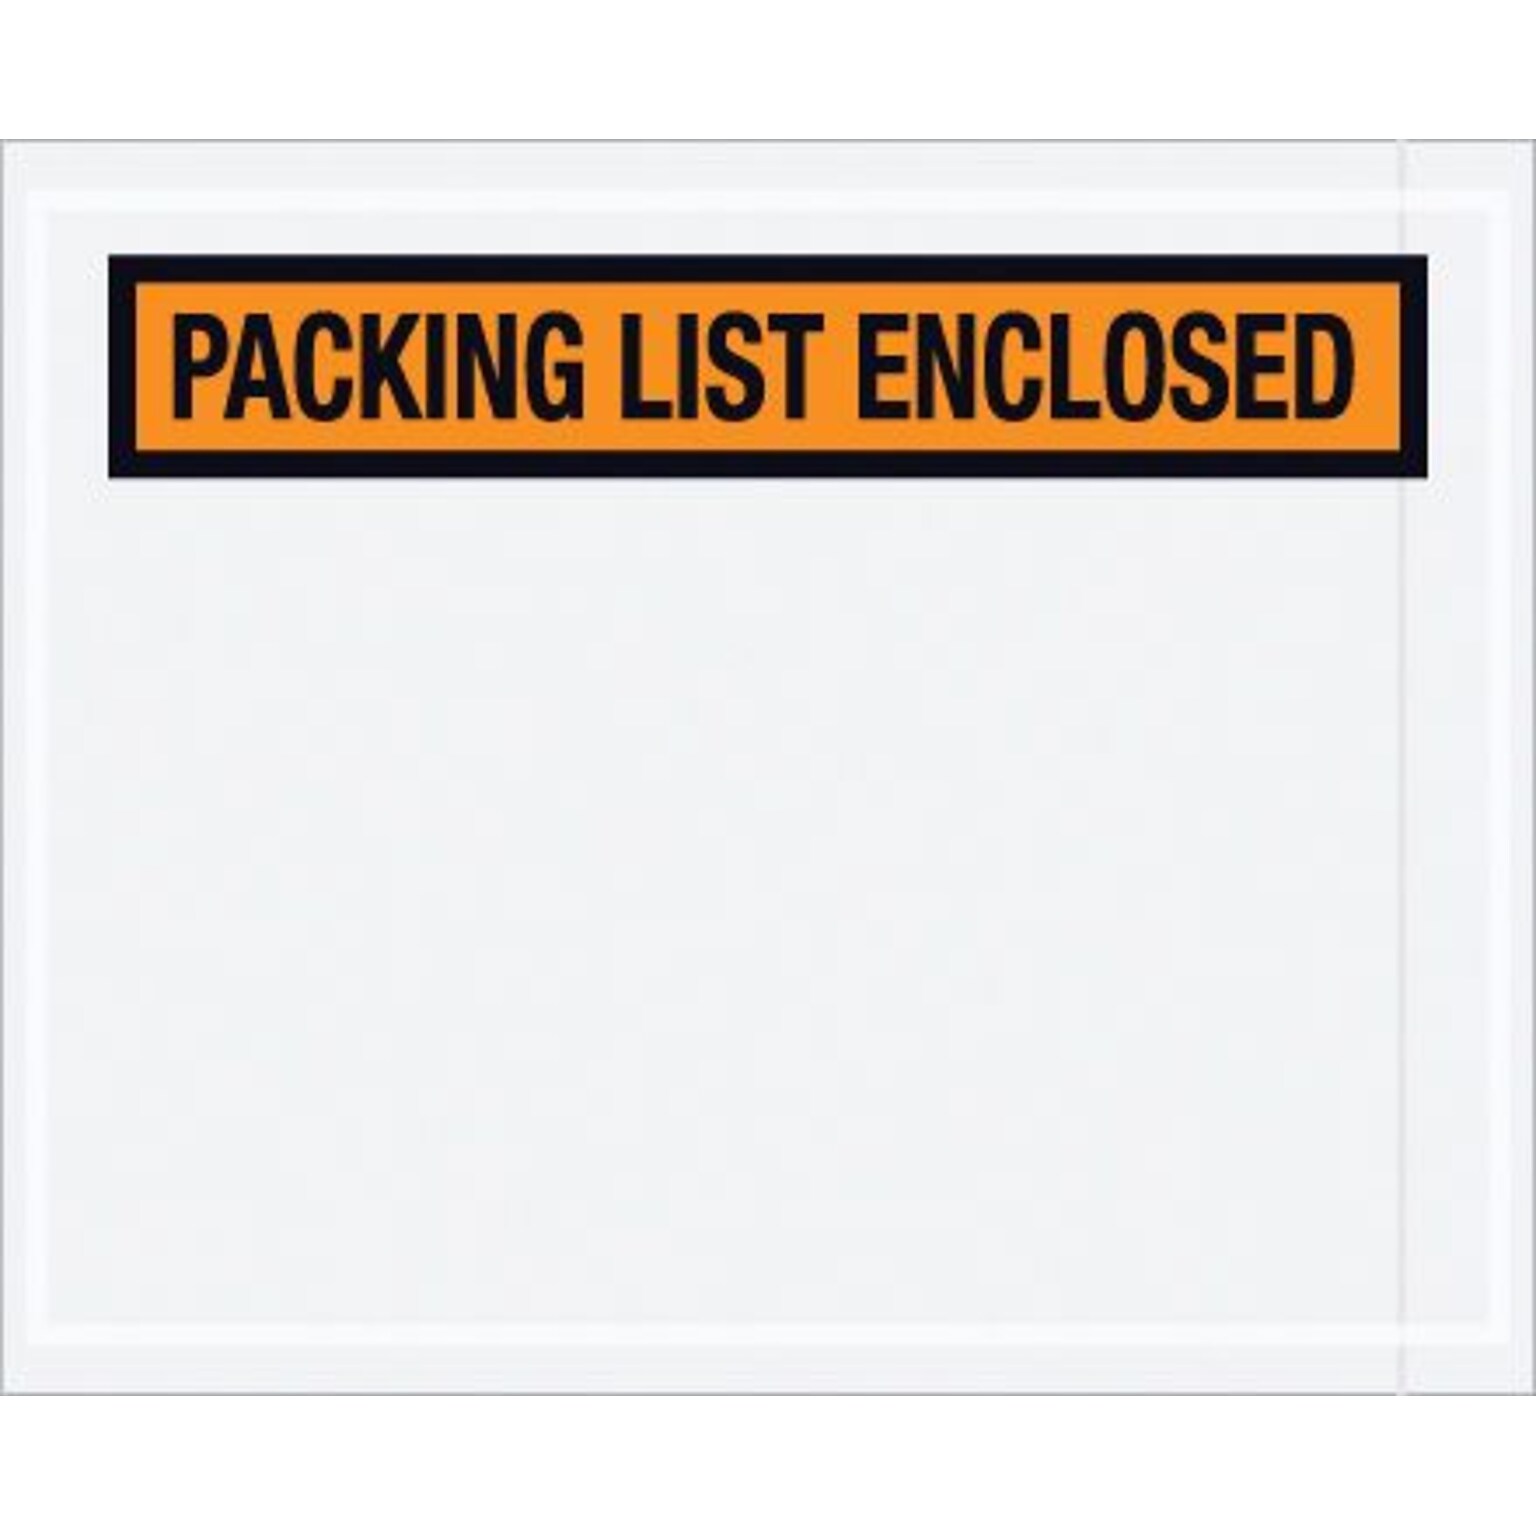 7 x 6 Panel Face Packing List Envelope, 1000/CT